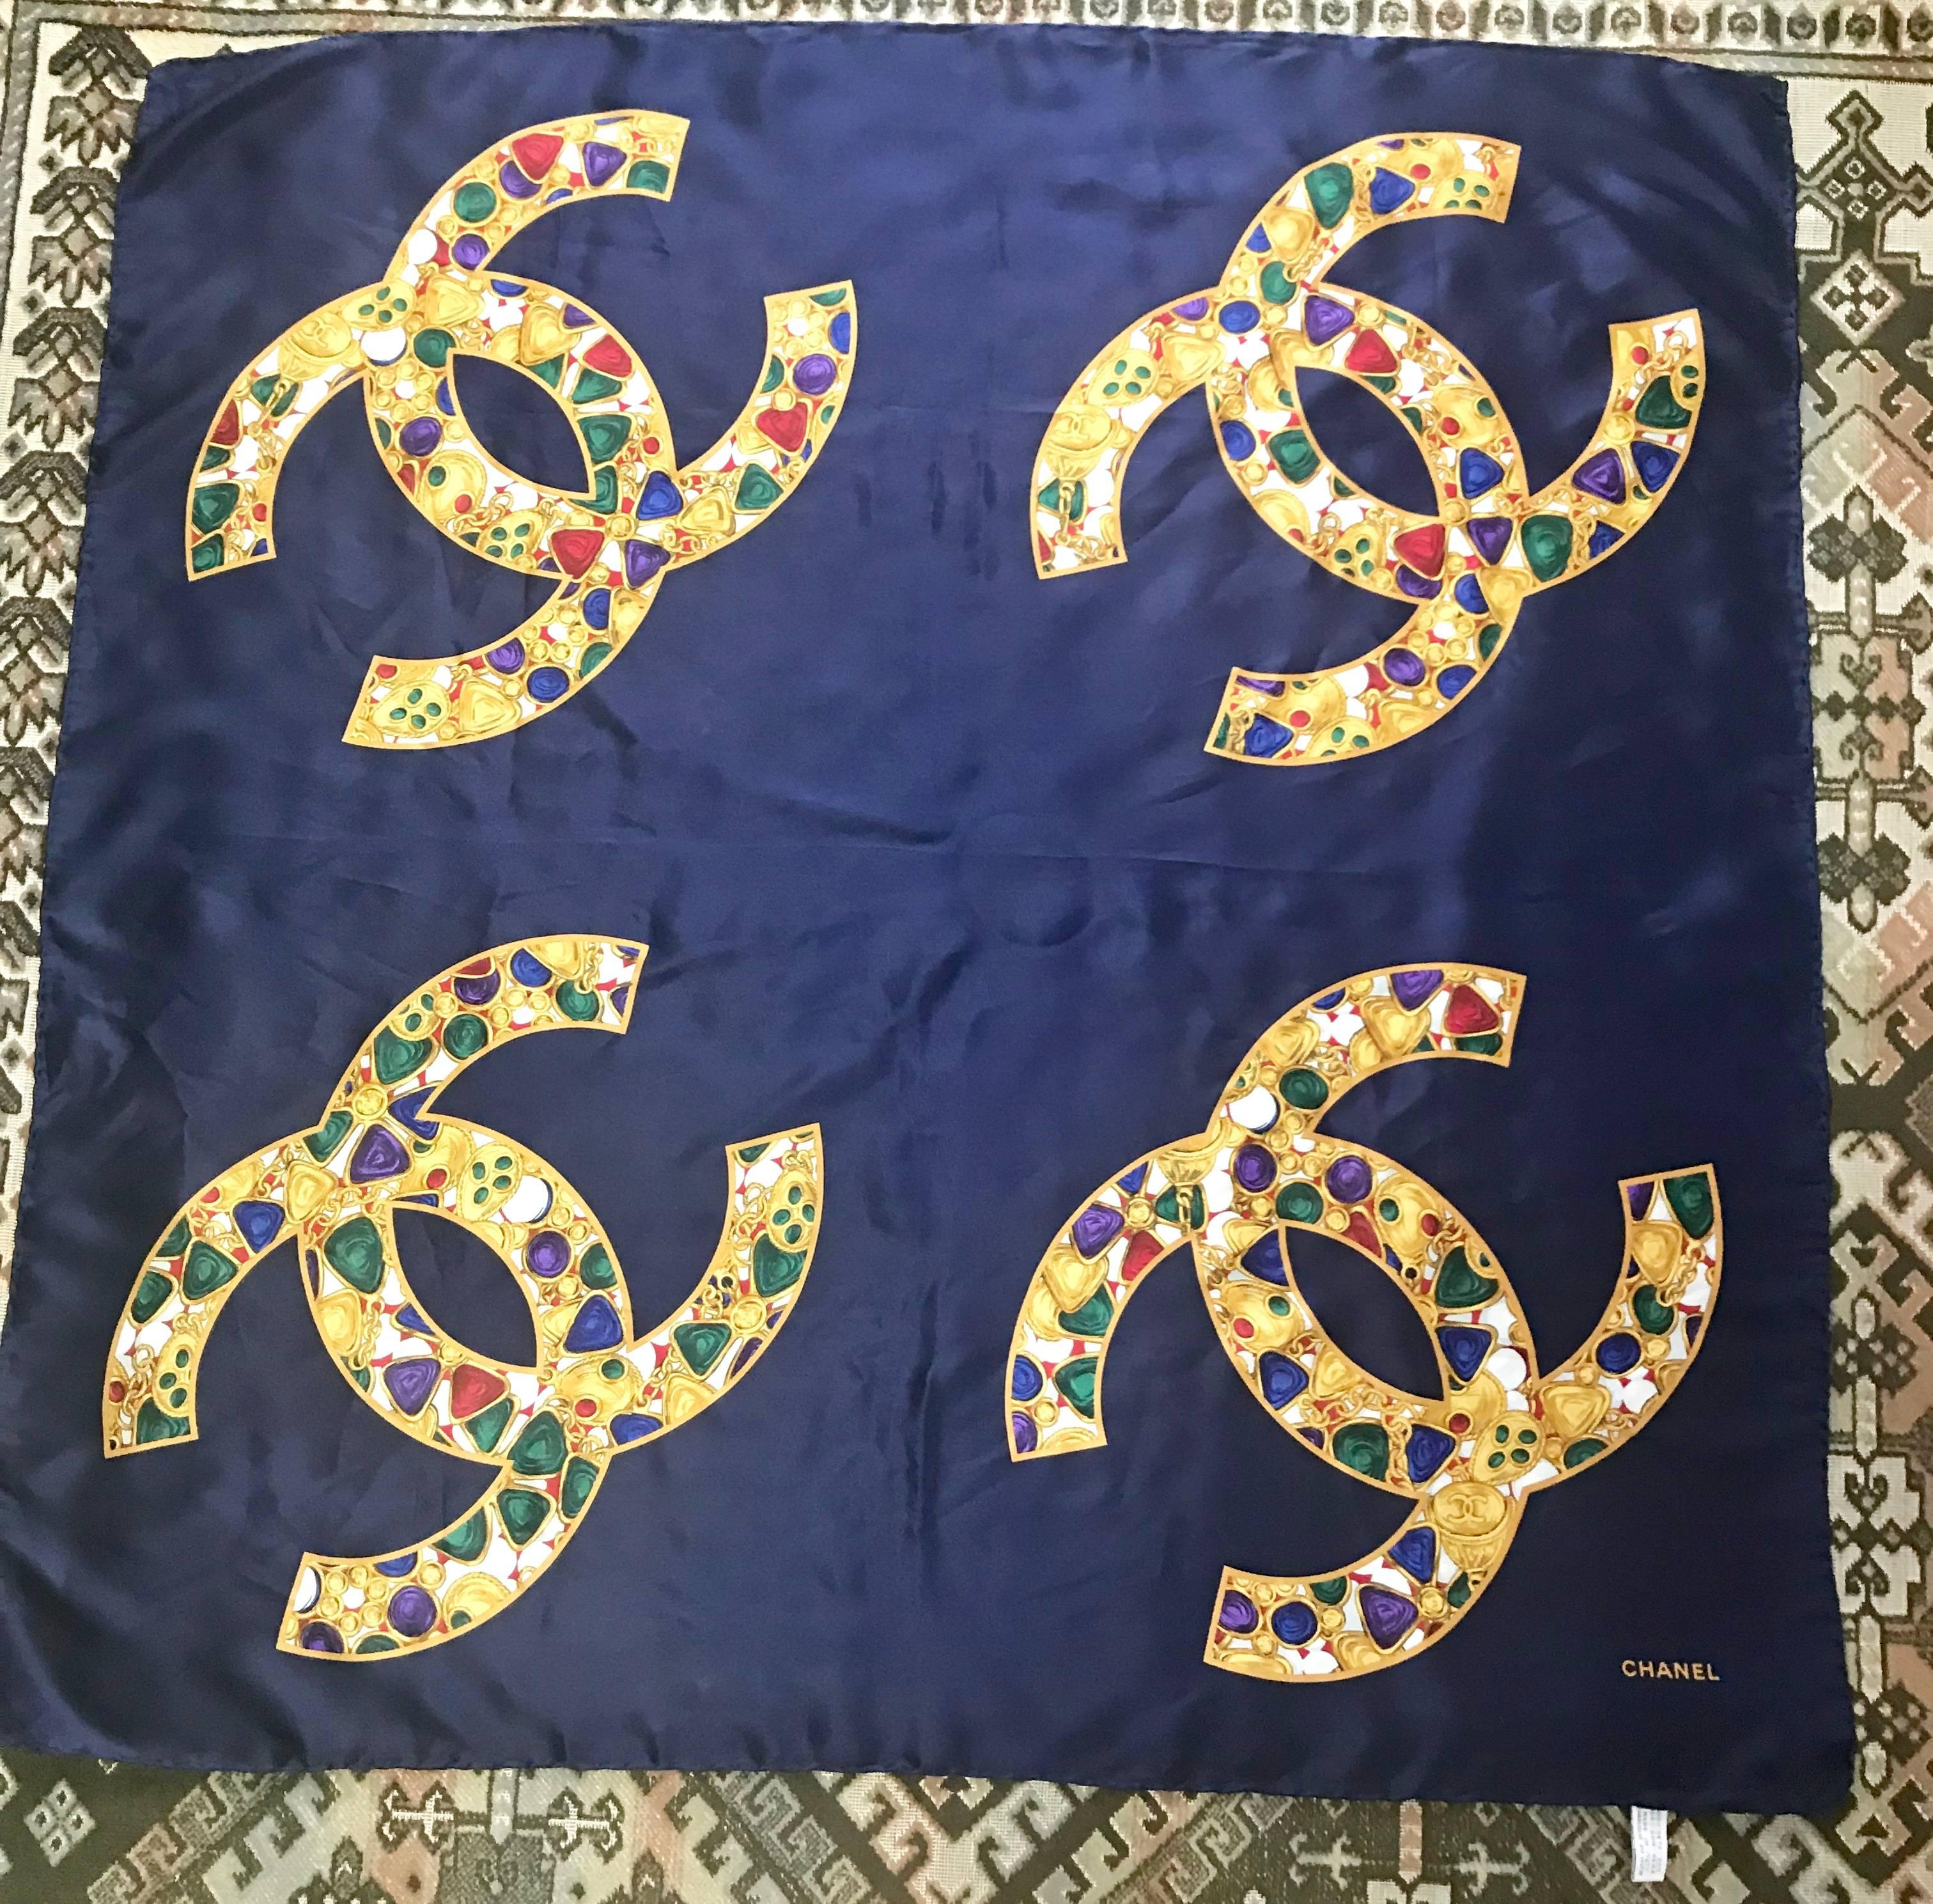 1990s. Vintage CHANEL large navy 100% silk scarf with gold, red, purple, green, multicolor Gripoix, chain, jewelry print in 4 CC marks Gorgeous wrap.

This is a 100% silk scarf from CHANEL in the 90's. 
Very nice and soft silk wrap....

With